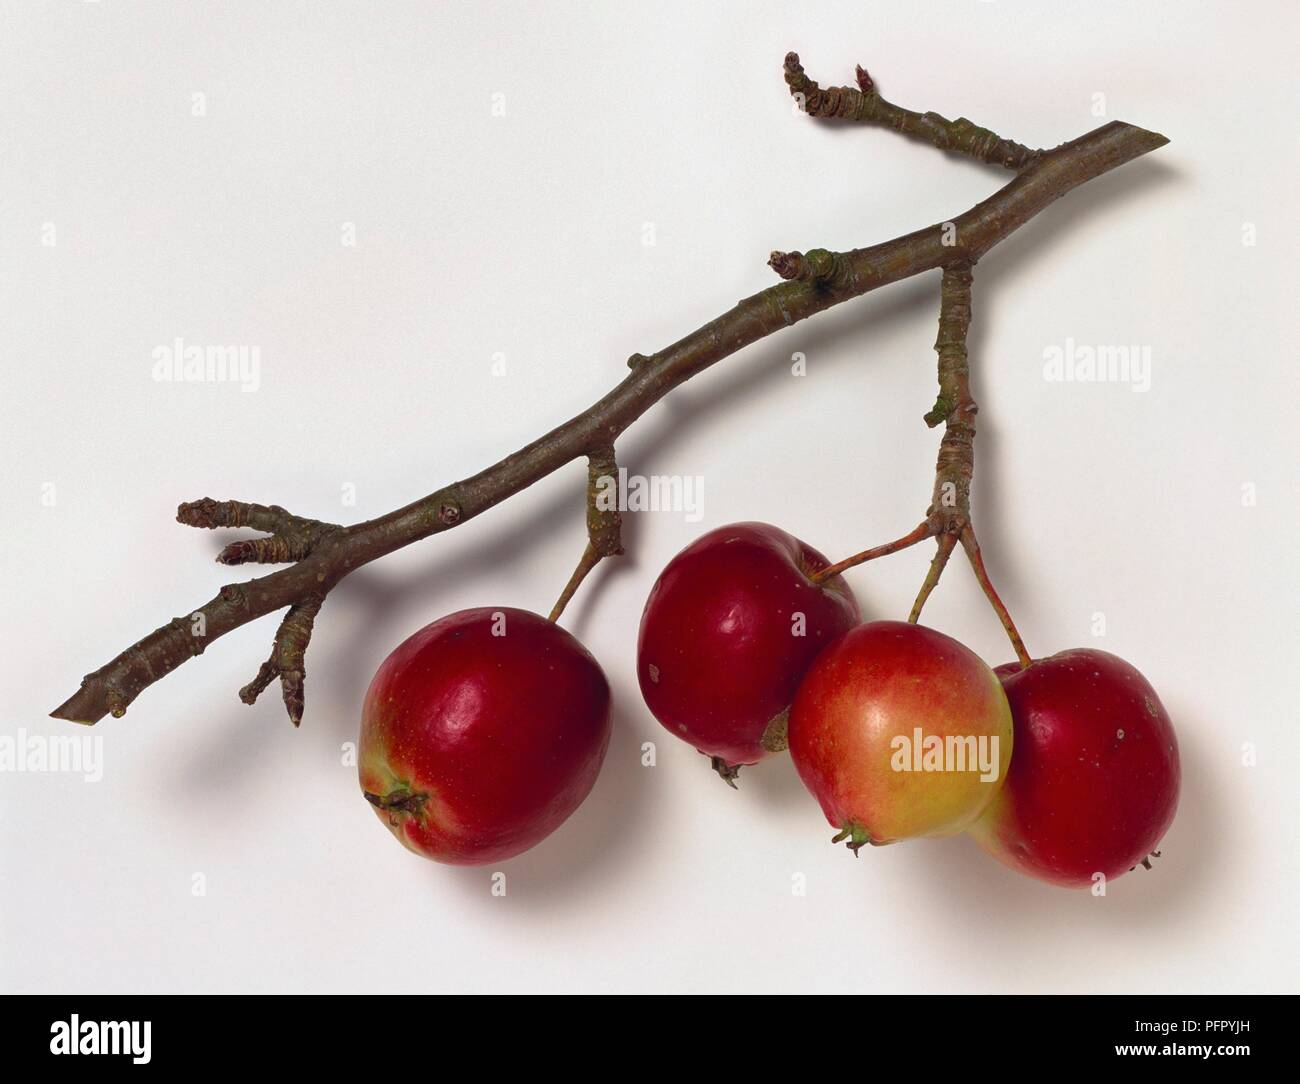 Malus 'Dartmouth' (Crabapple Hybrid) twig cutting with red berry fruits Stock Photo